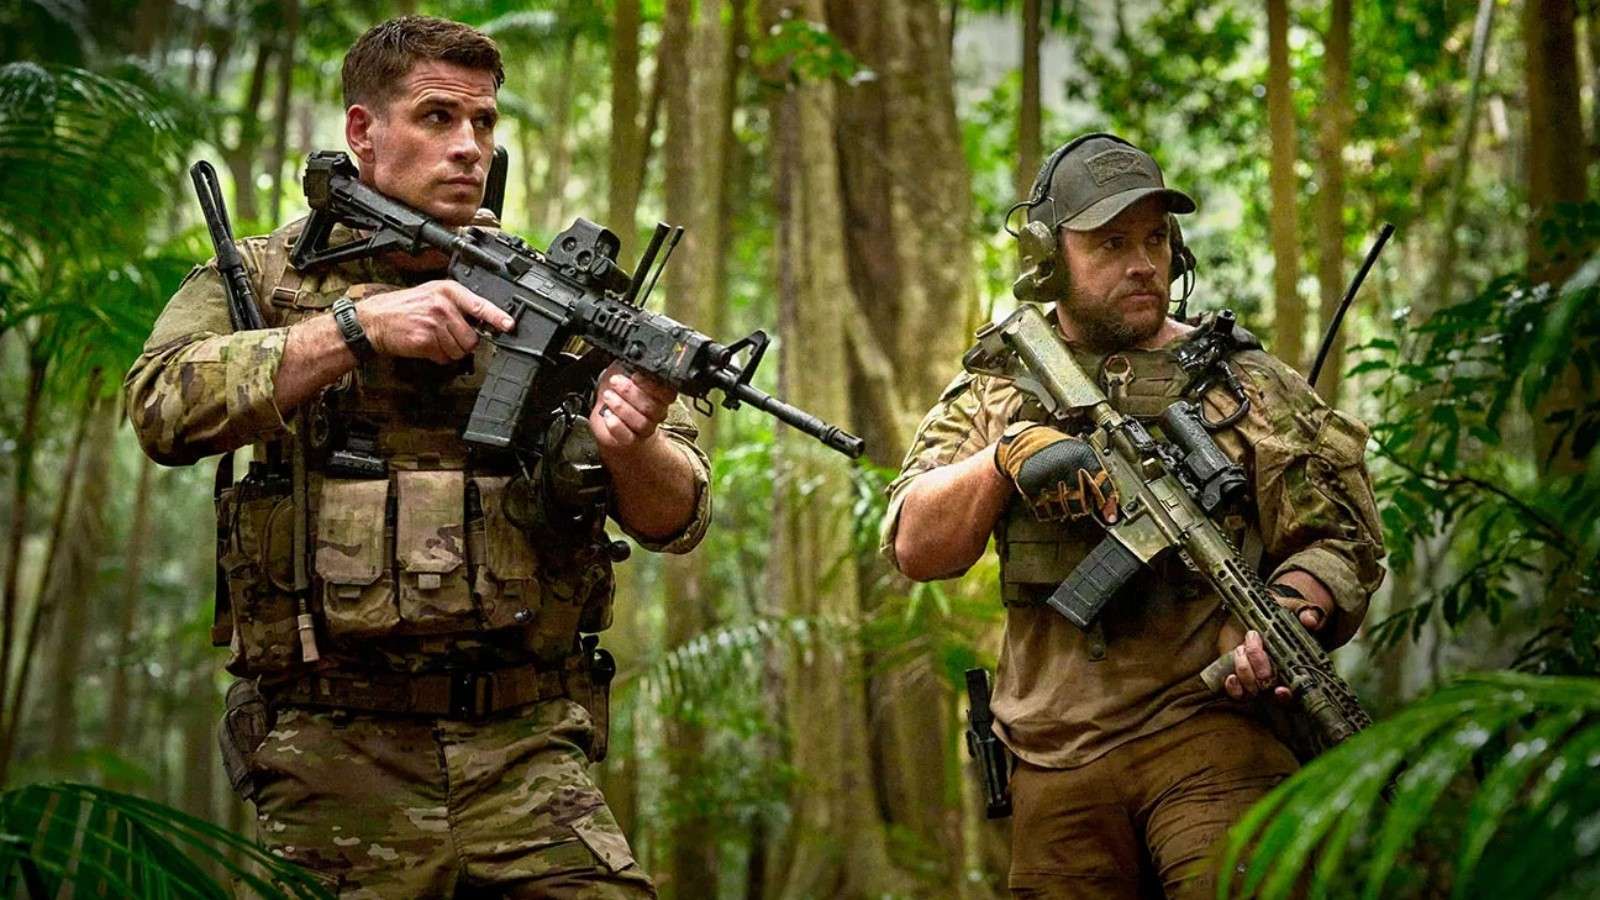 Land of Bad: Two men dressed in army uniforms hold their guns in the jungle